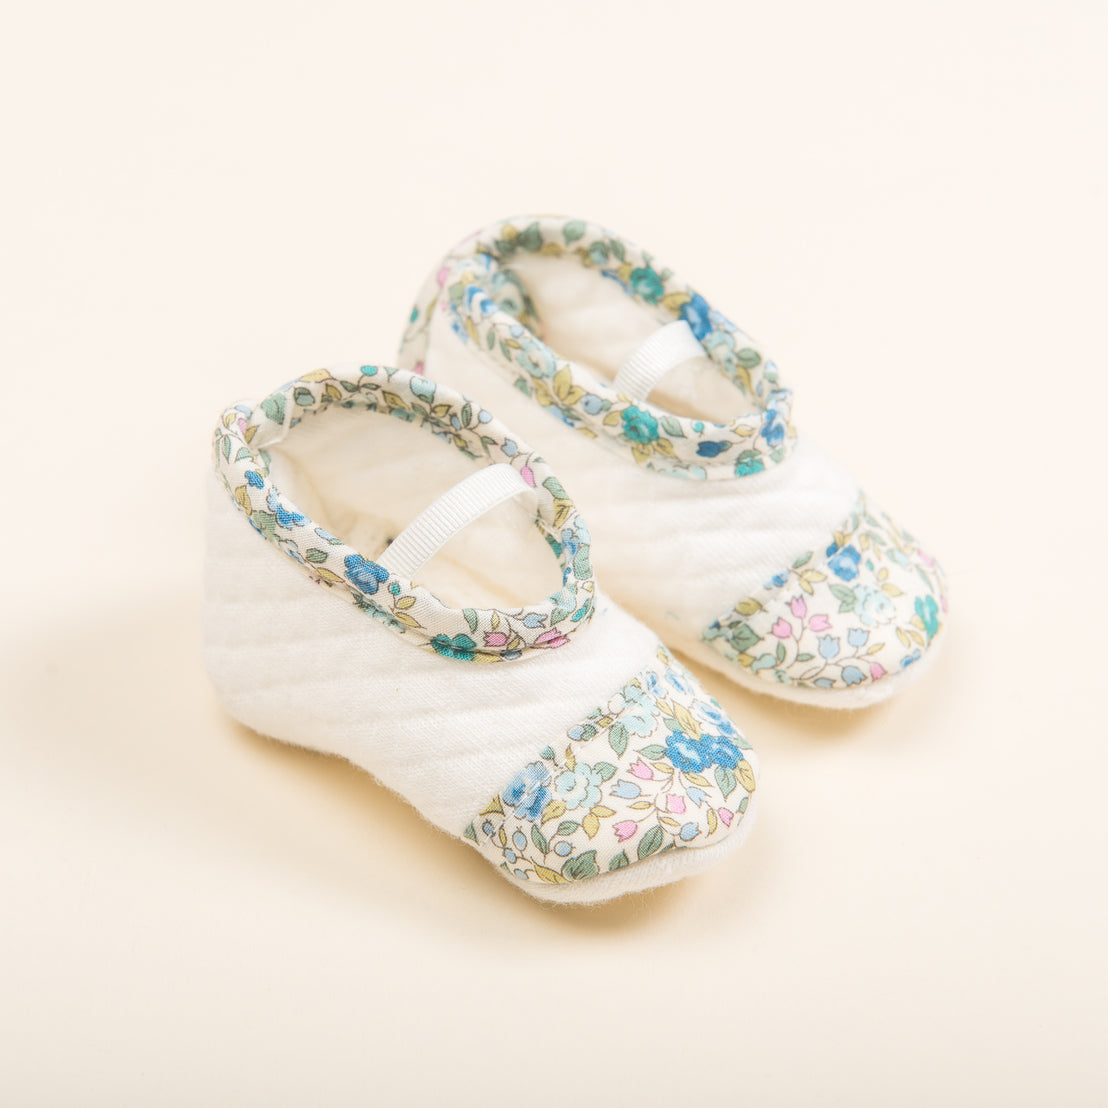 A pair of Petite Fleur Quilted Booties with white tops and floral patterned sides on a neutral background.